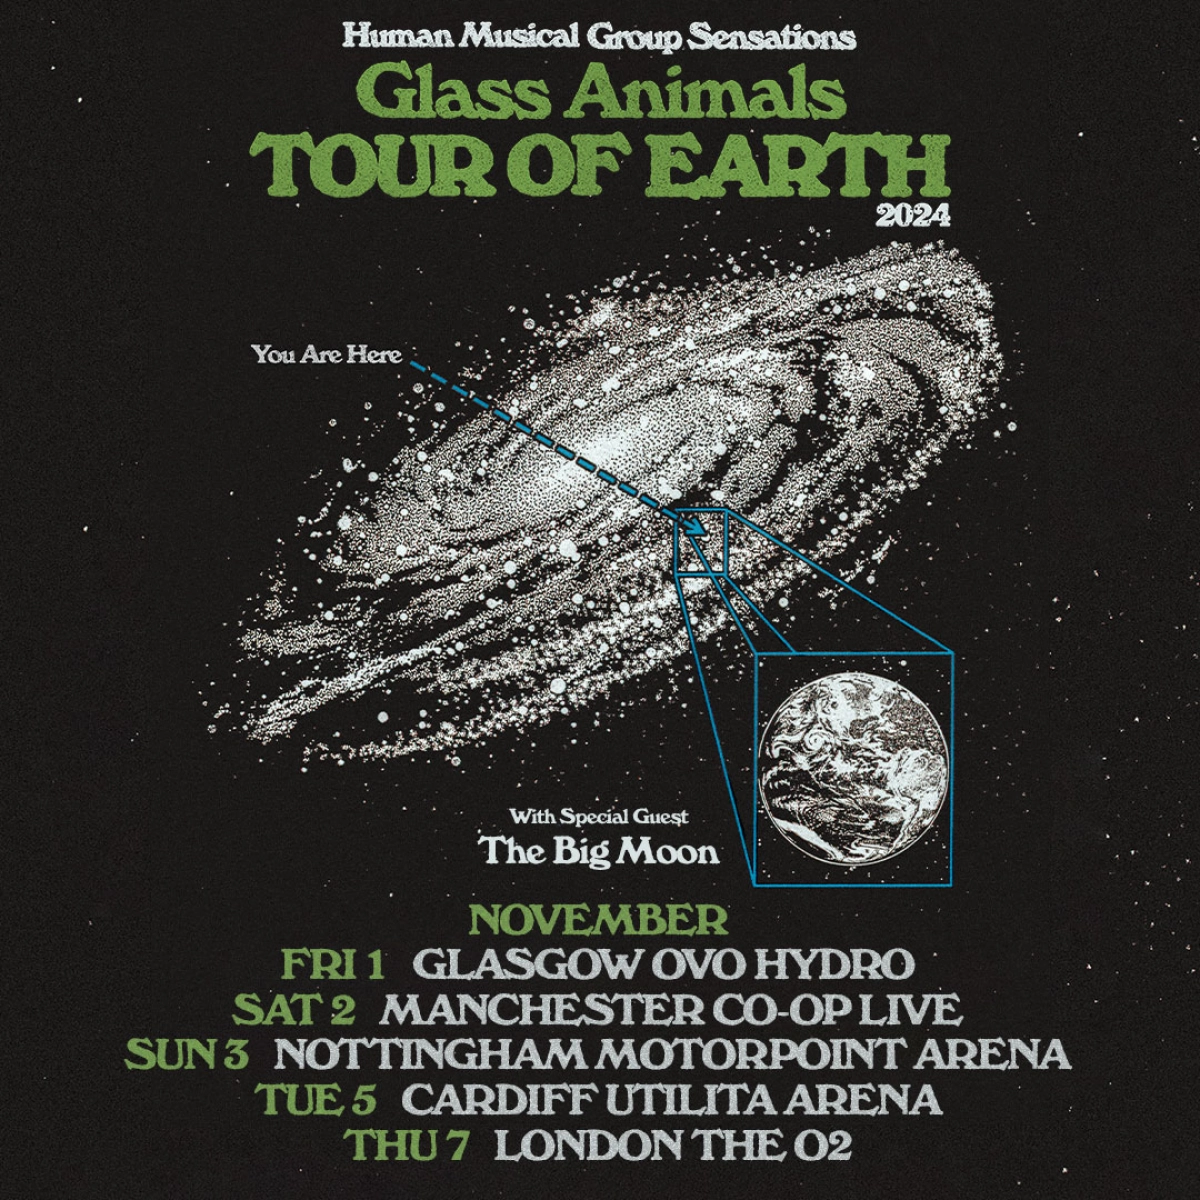 Glass Animals at Co-op Live Tickets